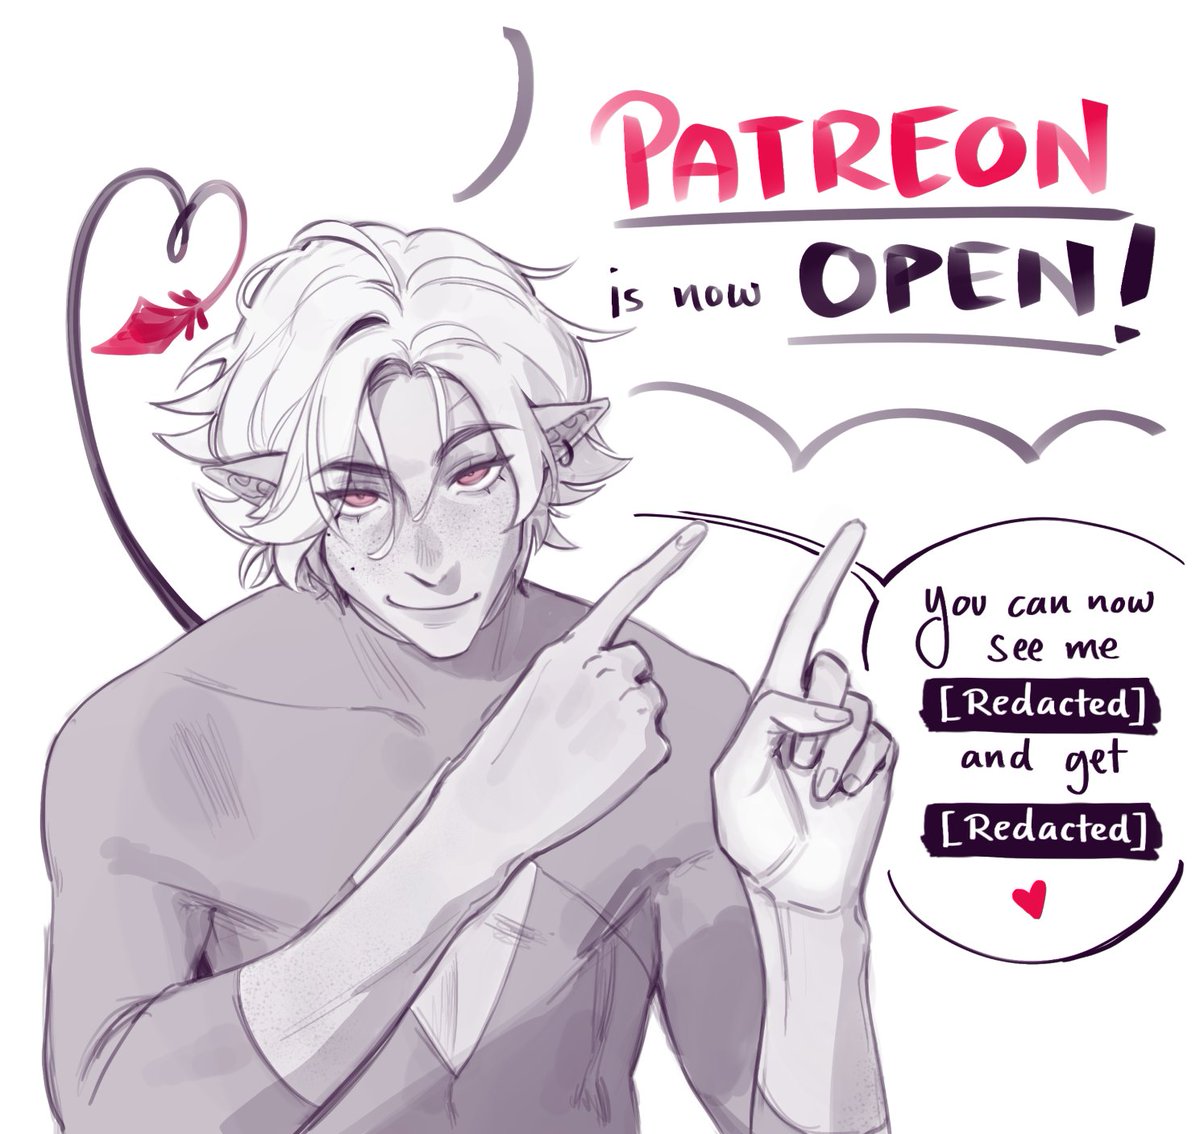 HEYYYY I'M ON PATRE0N NOW!! ∠( ᐛ 」∠)_

You can now become my patr0n if you wish to support me!
I will be posting wips, studies, full res content and exclusive spicy stuff :)

🔗 below! ⬇️ 